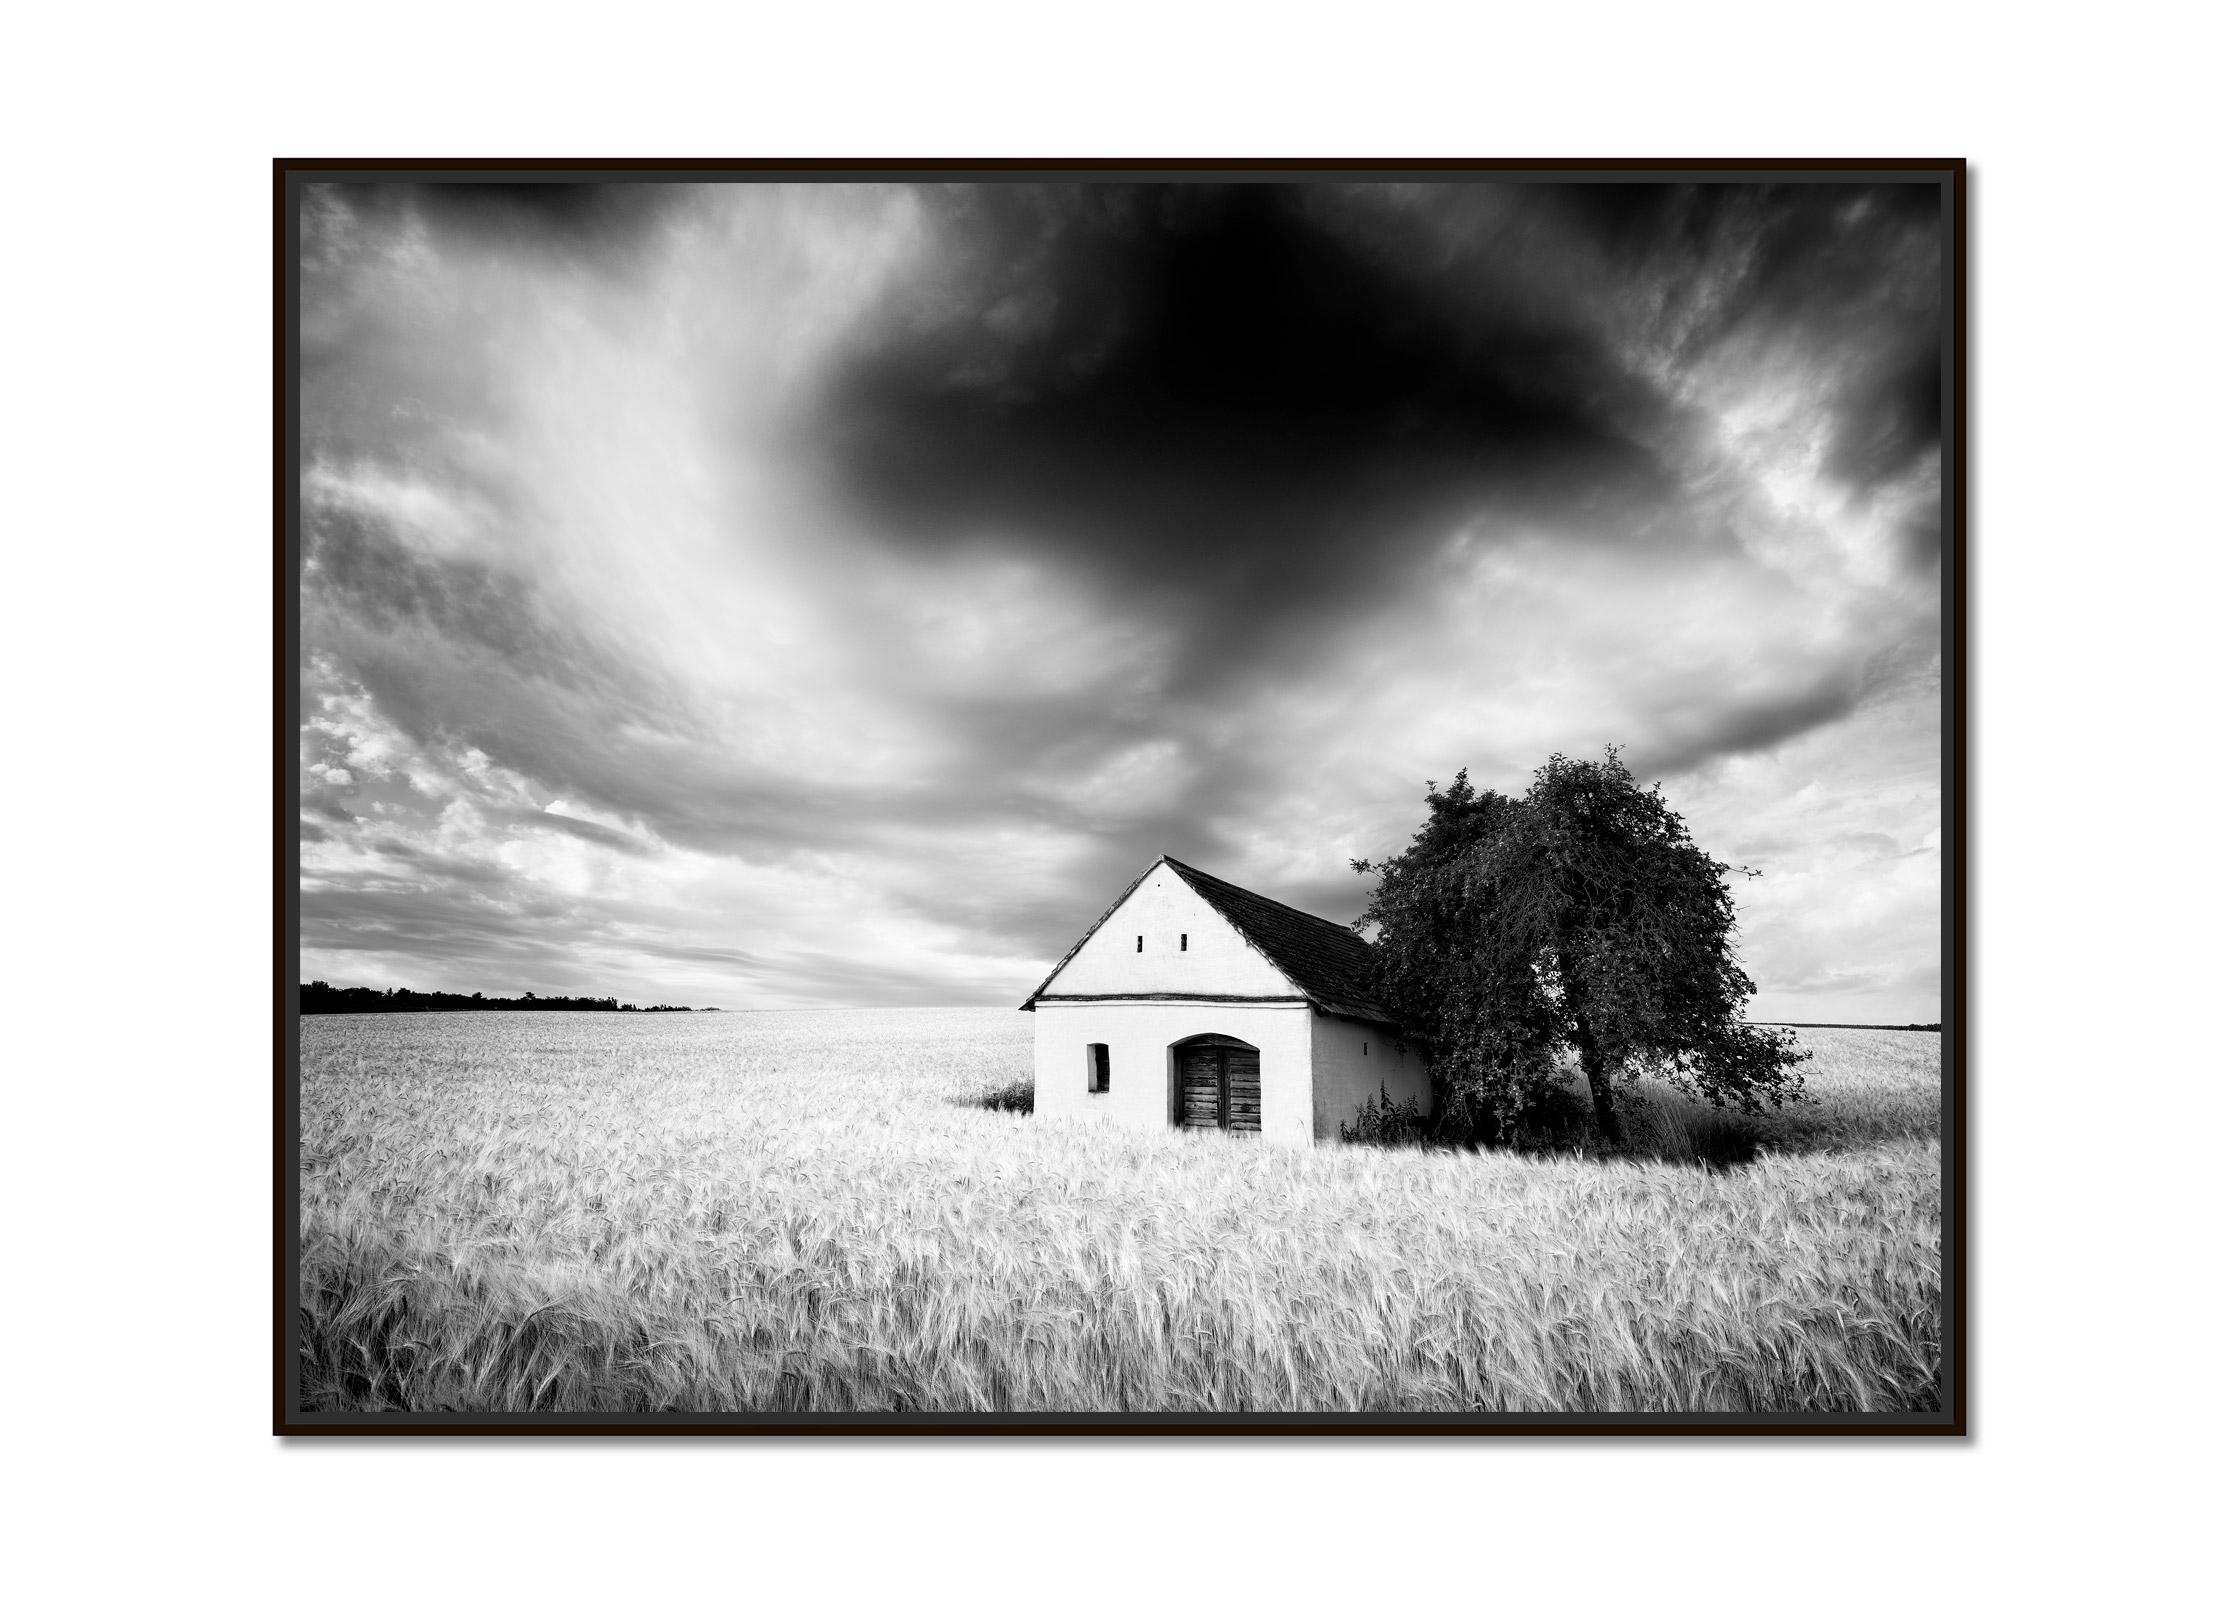 Wine Press House, cornfield, cloudy, black and white photography, landscape - Photograph by Gerald Berghammer